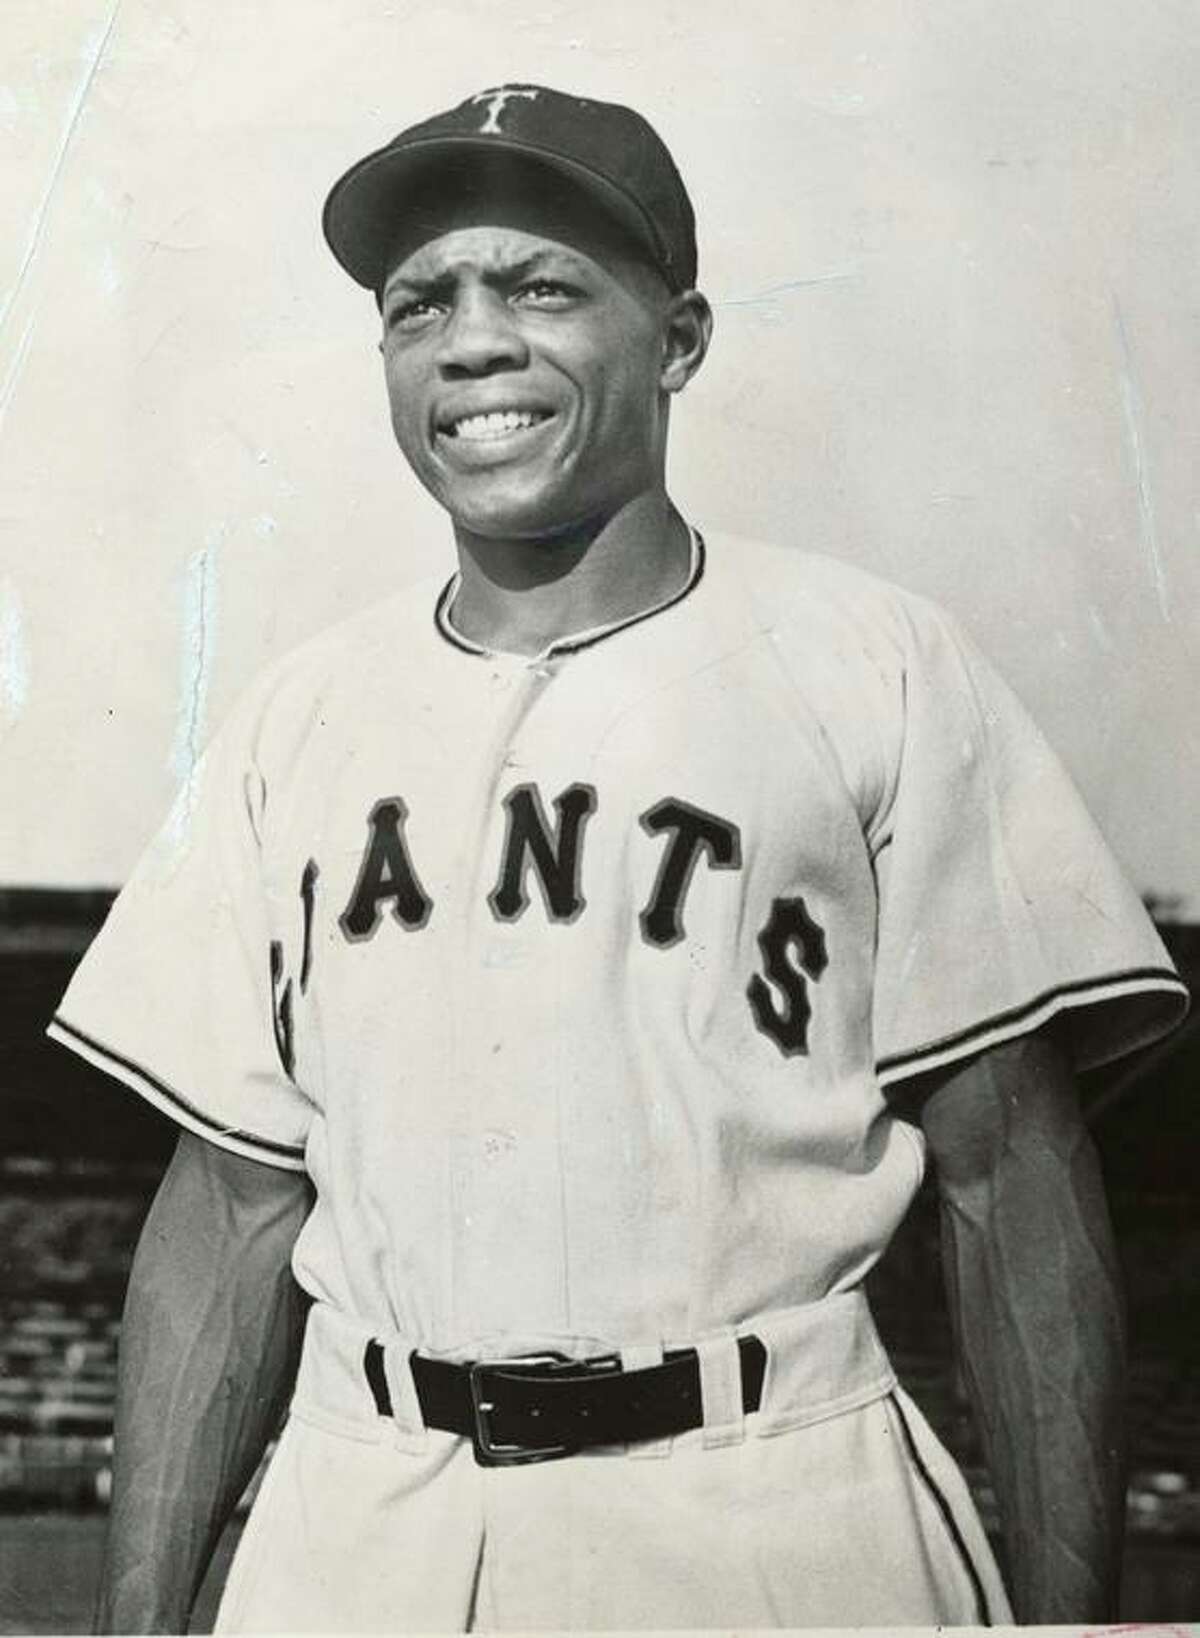 Willie Mays '24' book excerpt The Story of the Absurdity of Racism